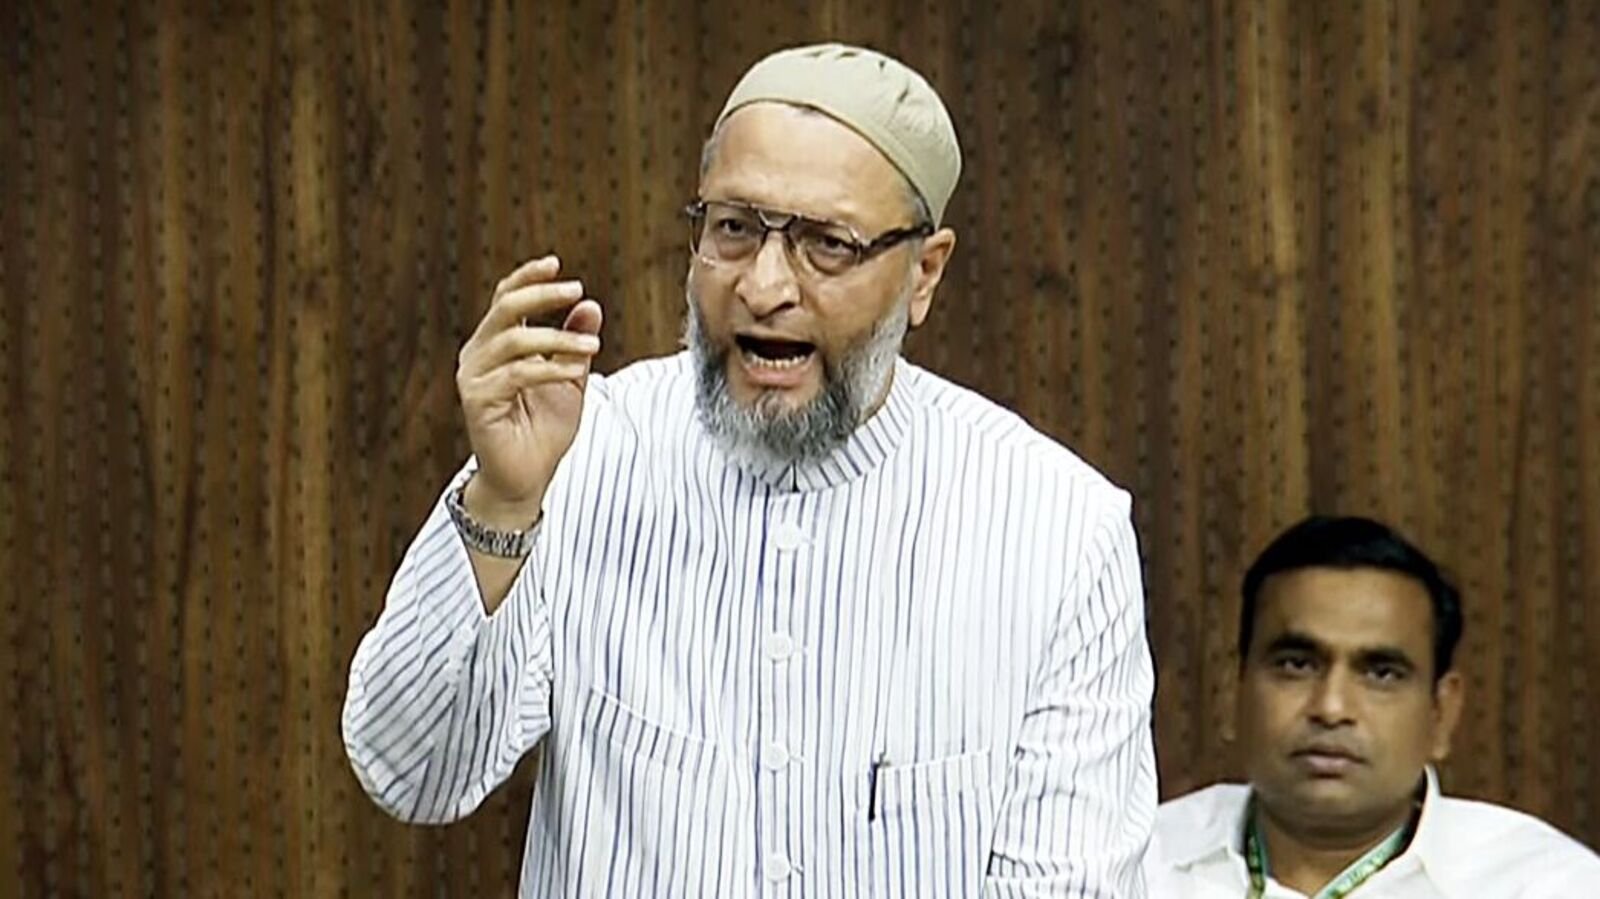 ’Unknown miscreants’ vandalise Owaisi’s Delhi residence: ’Om Birla please tell us if MPs’ safety will be guaranteed’